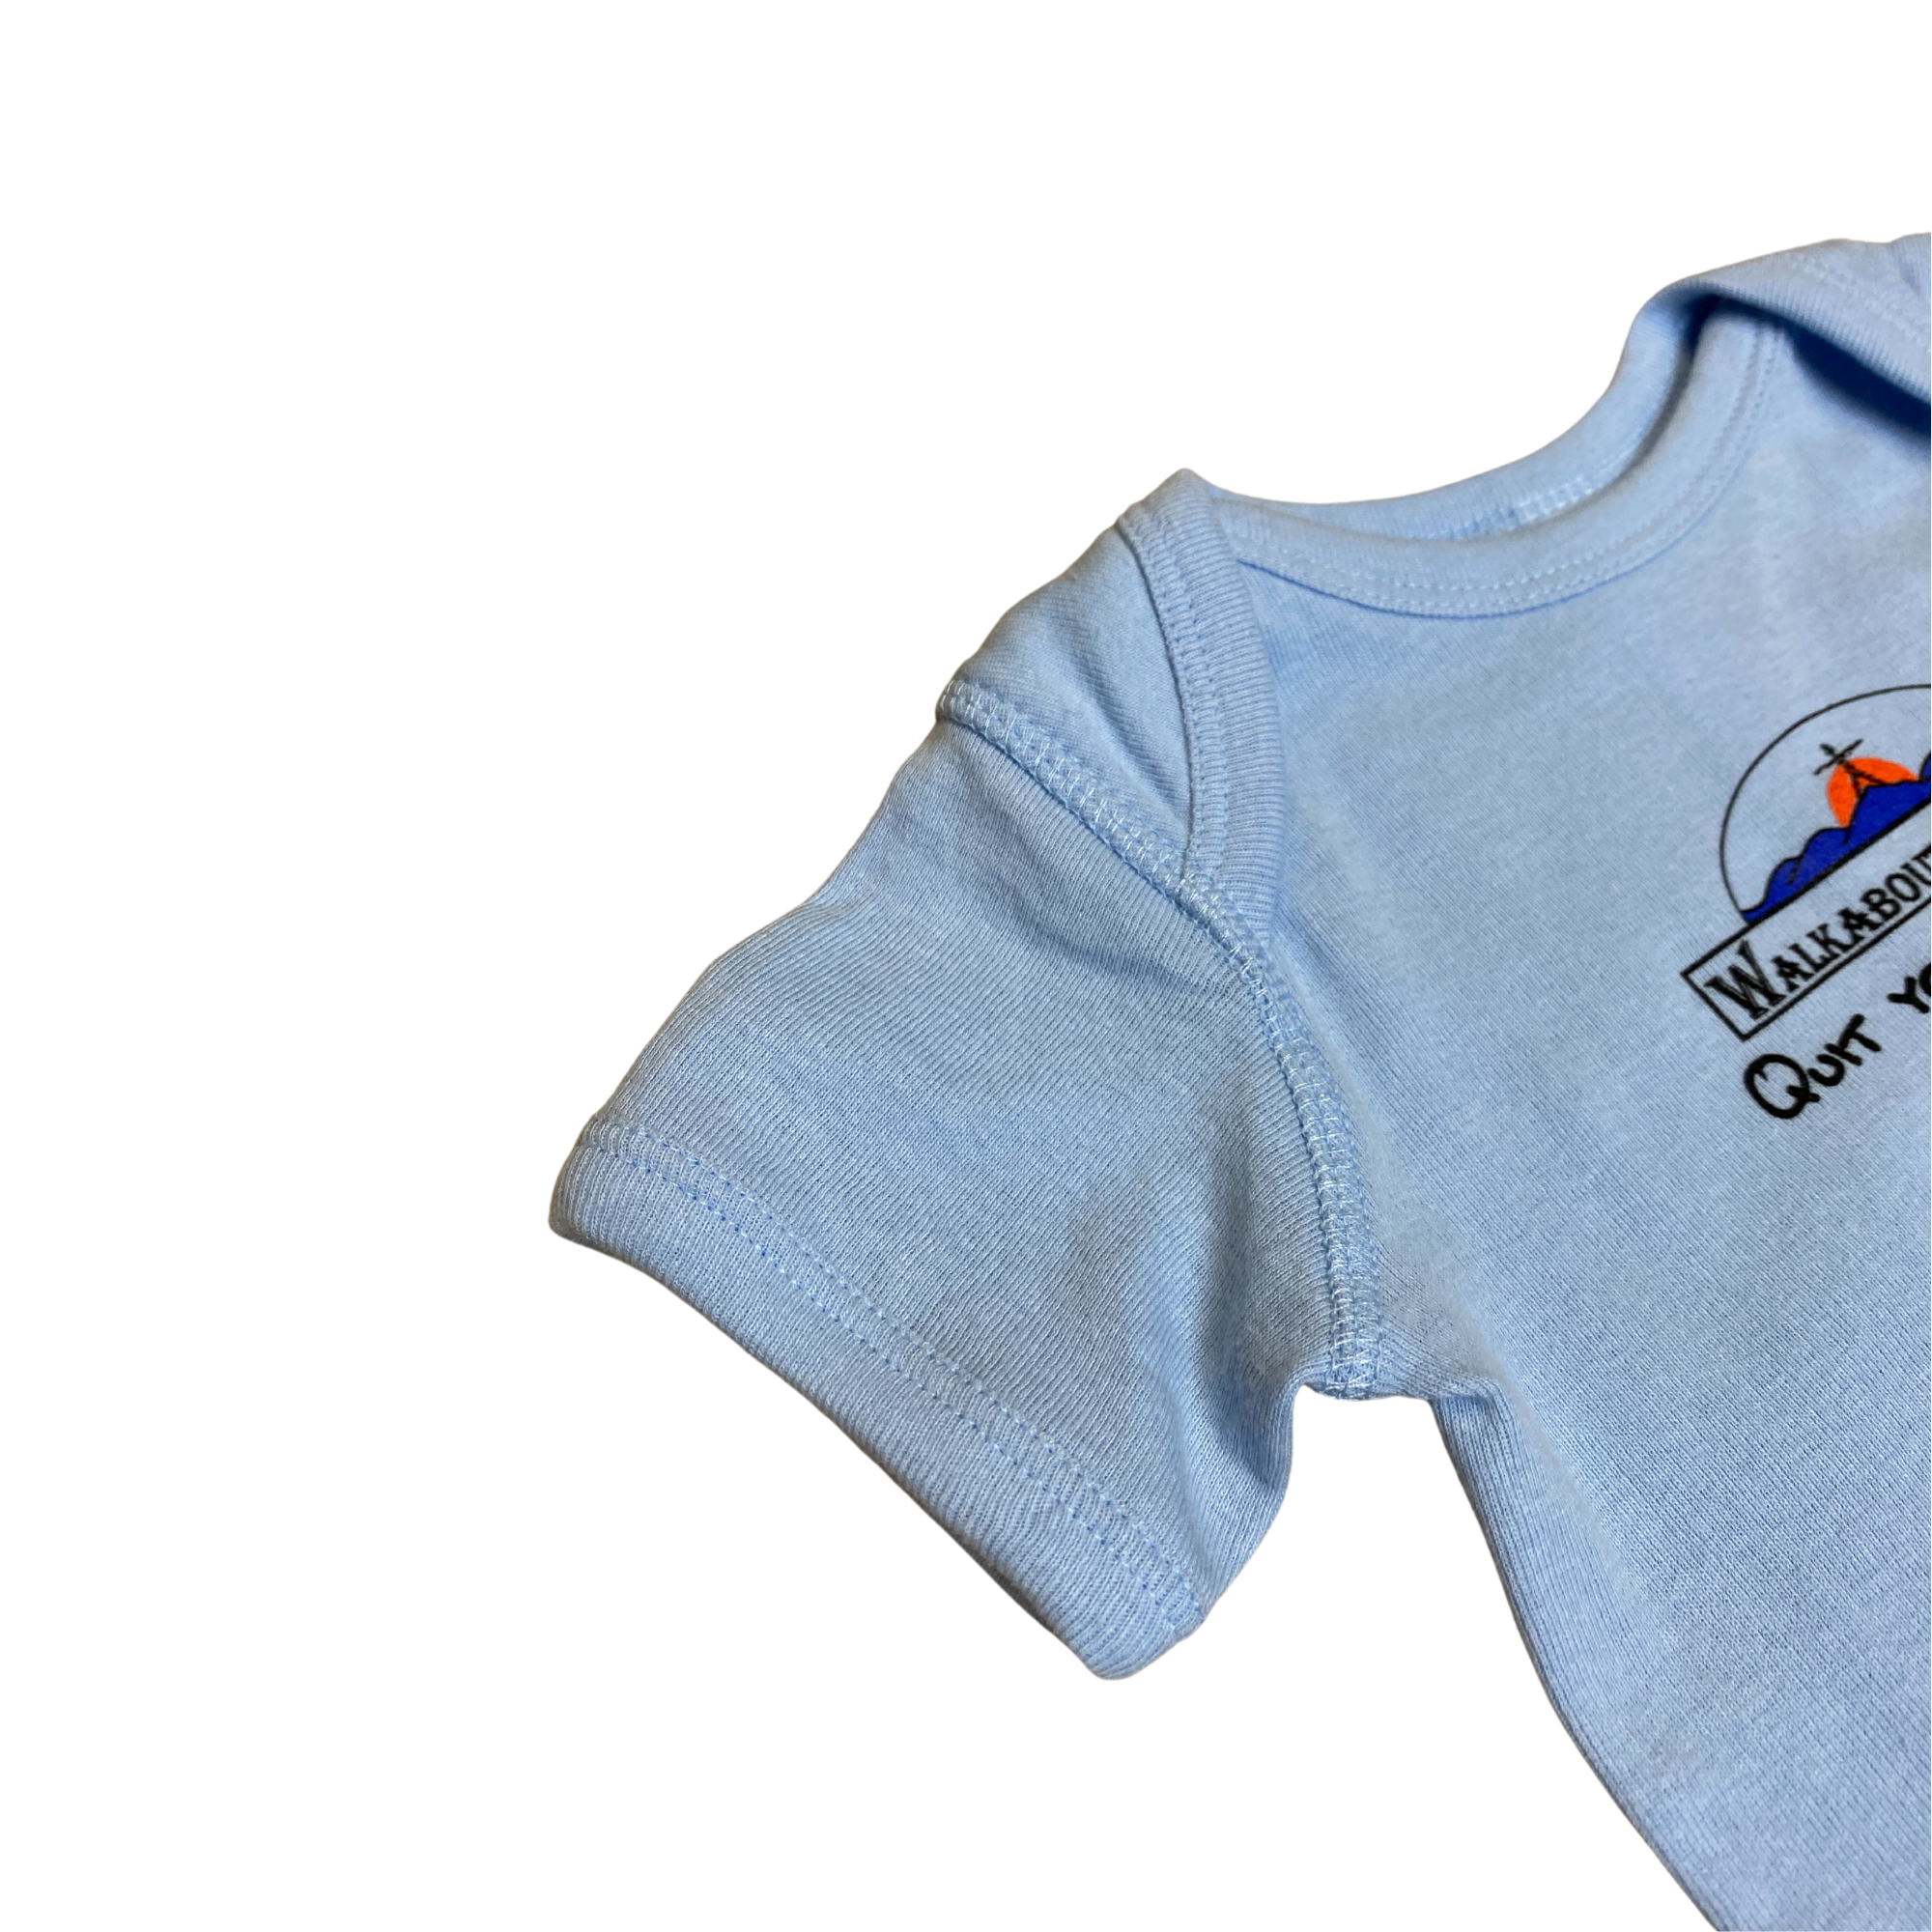 Walkabout Youth Onesie